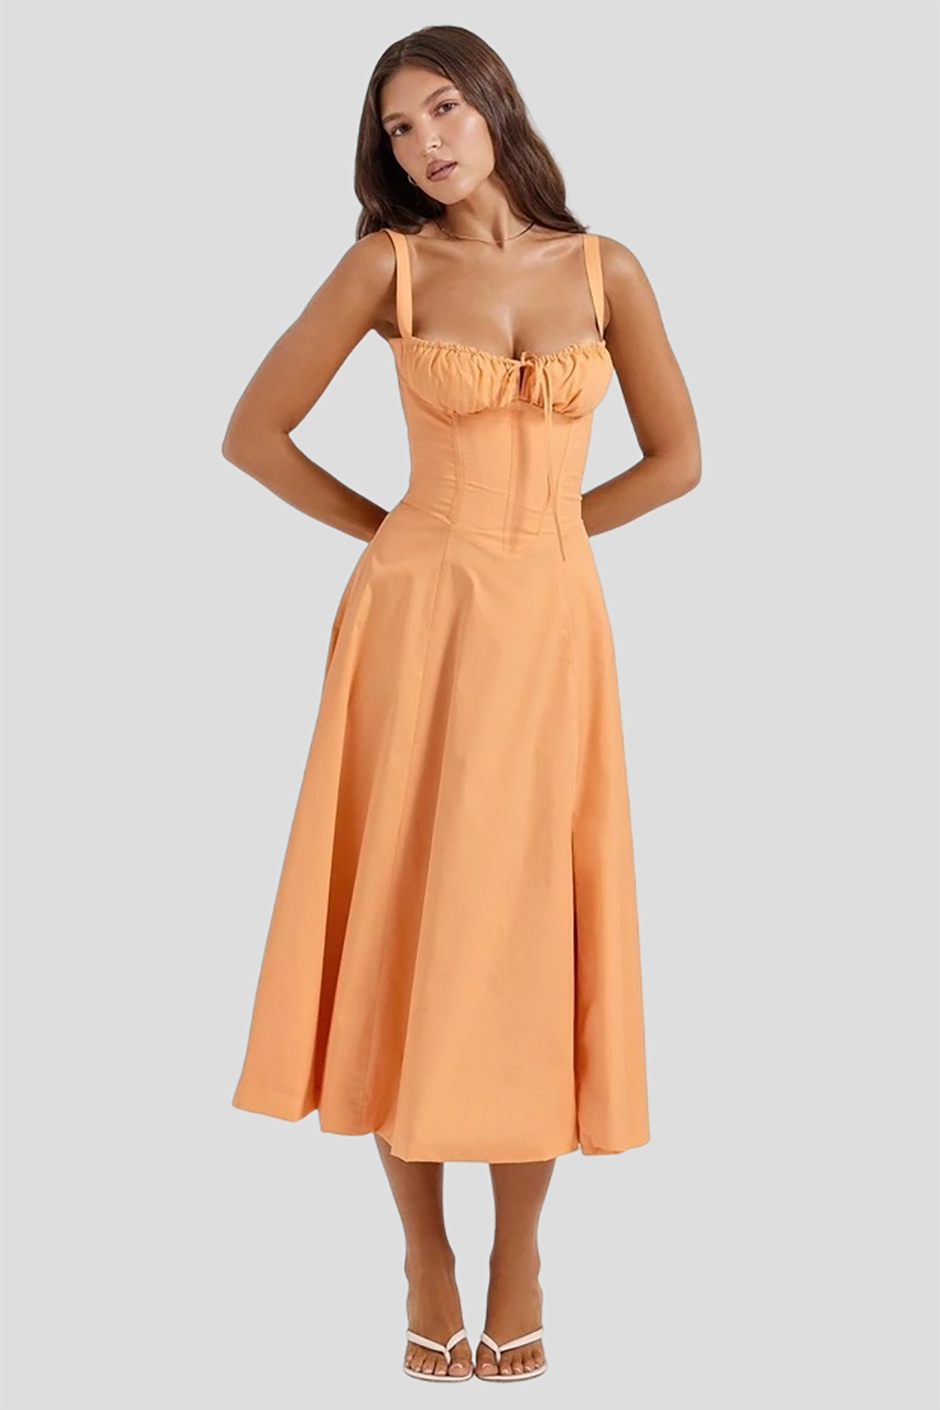 Orange peach bridesmaid dress from House of CB with gathered cup bodice and midi length 